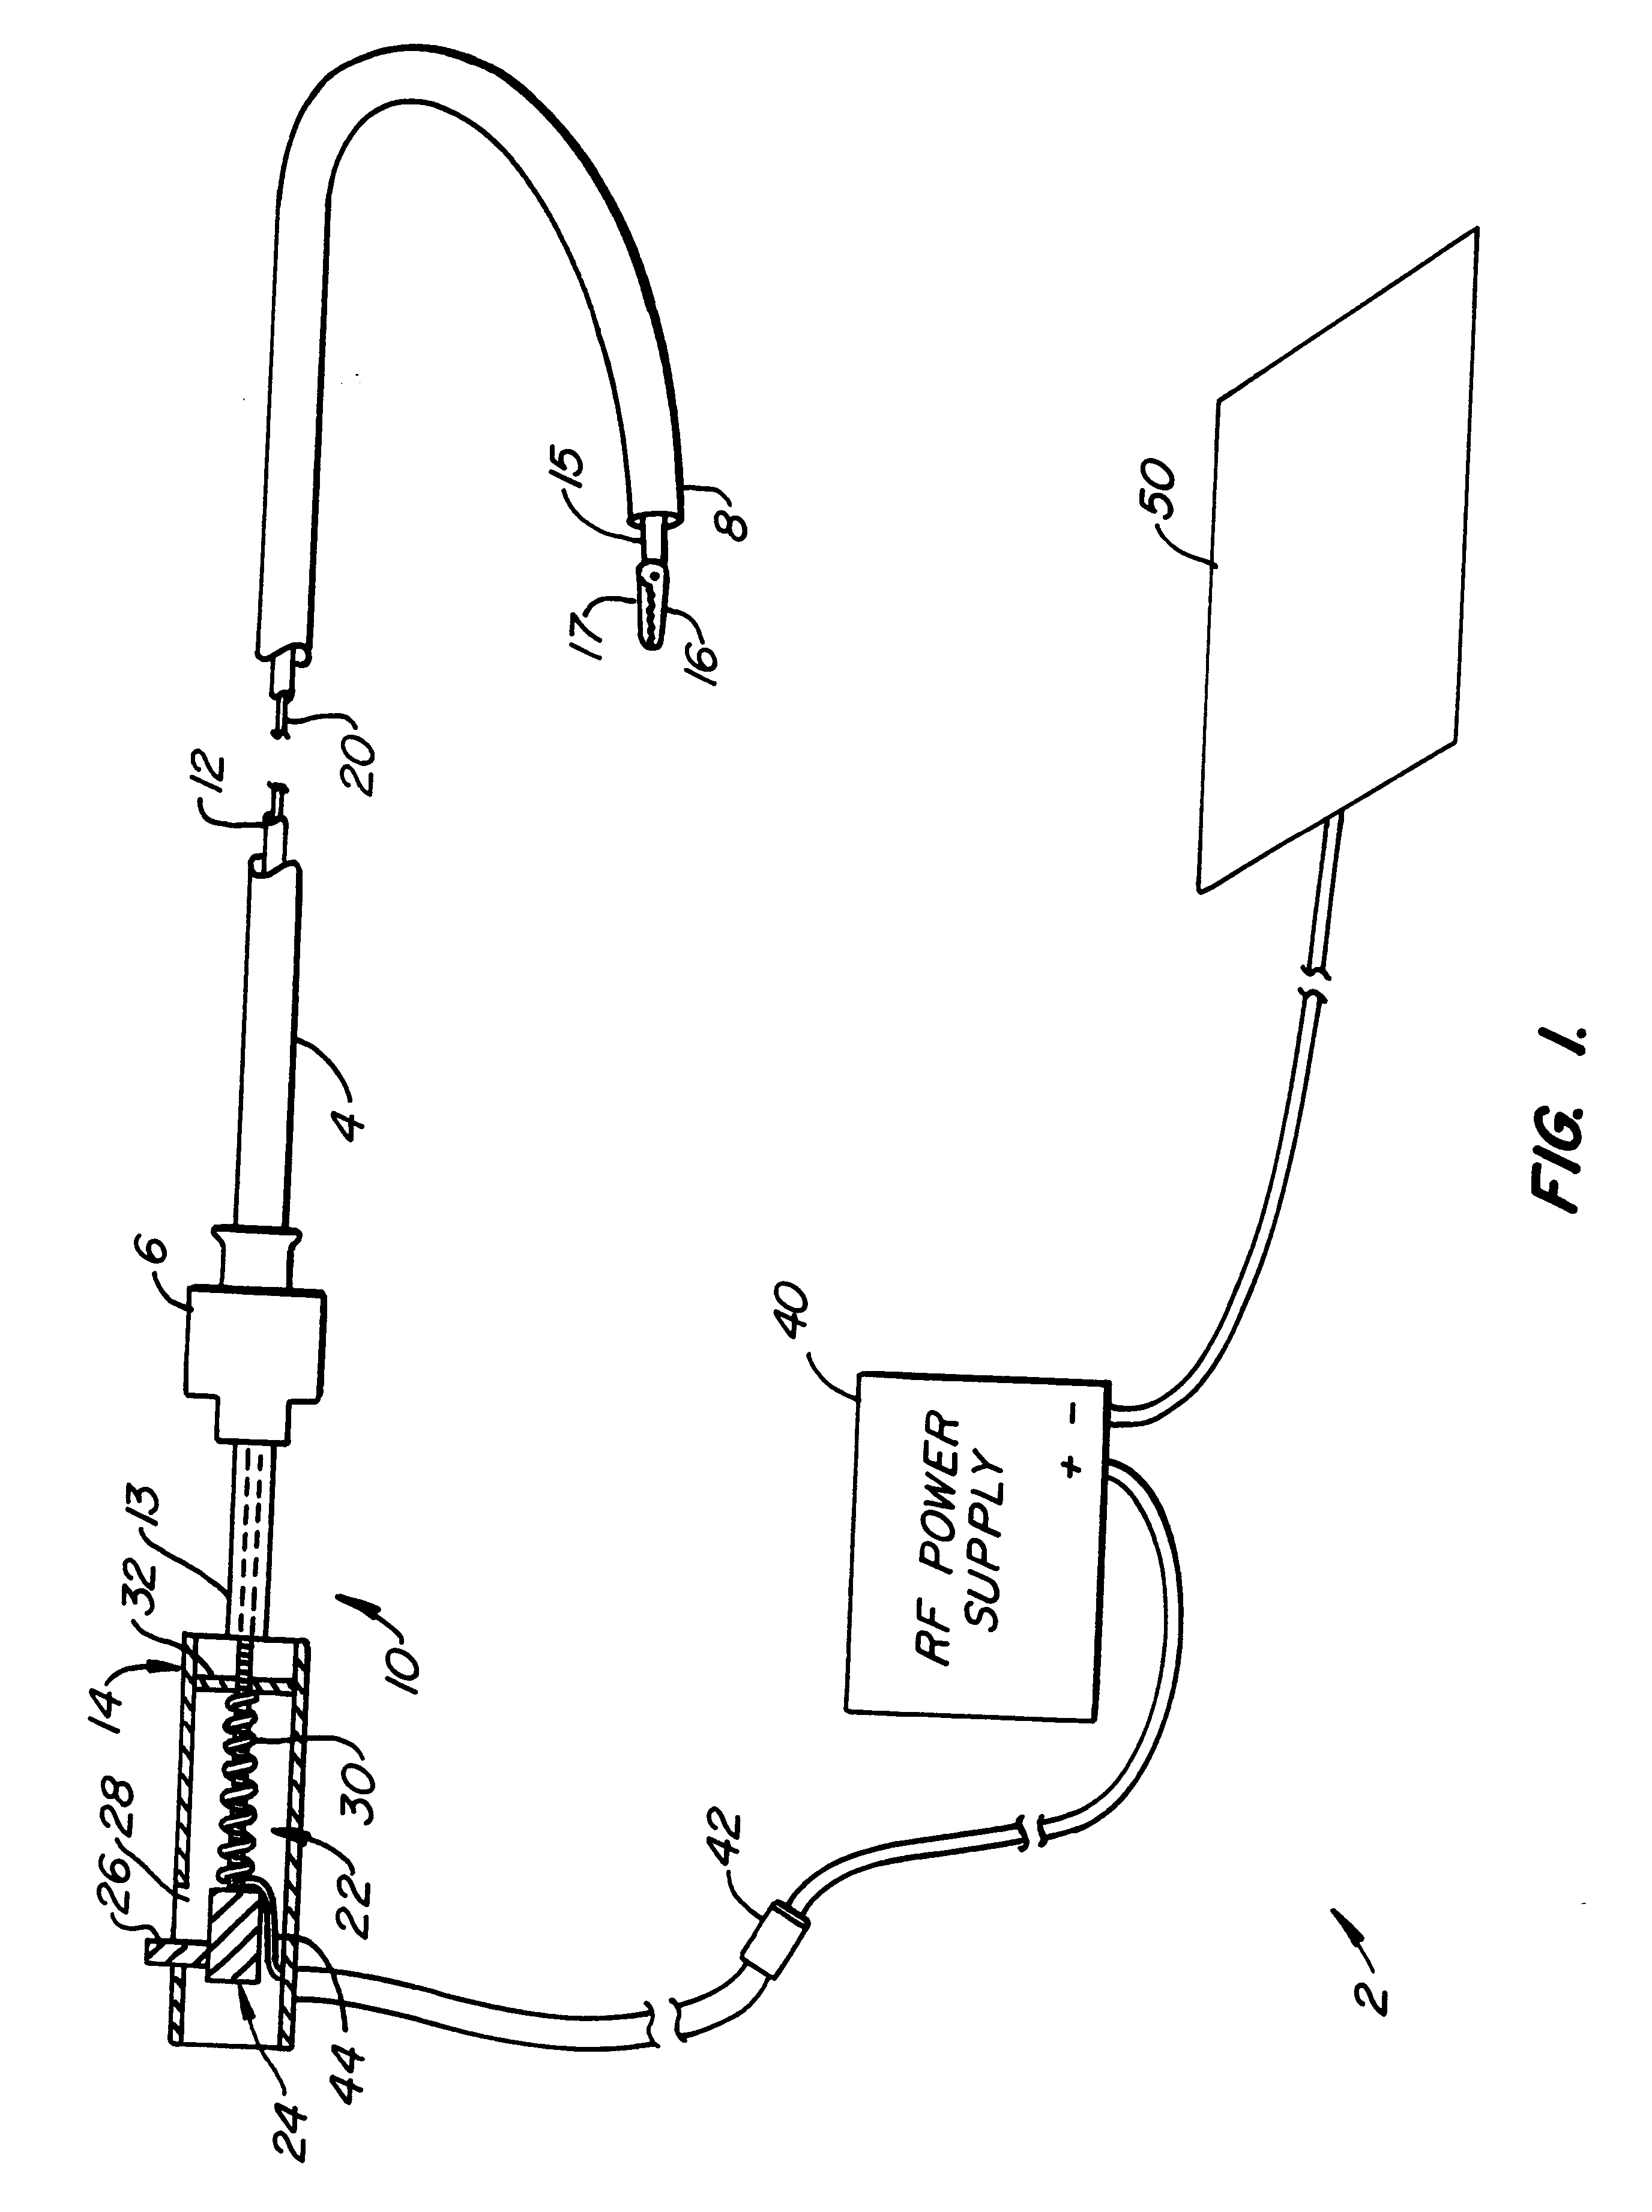 Method and device for enhancing vessel occlusion